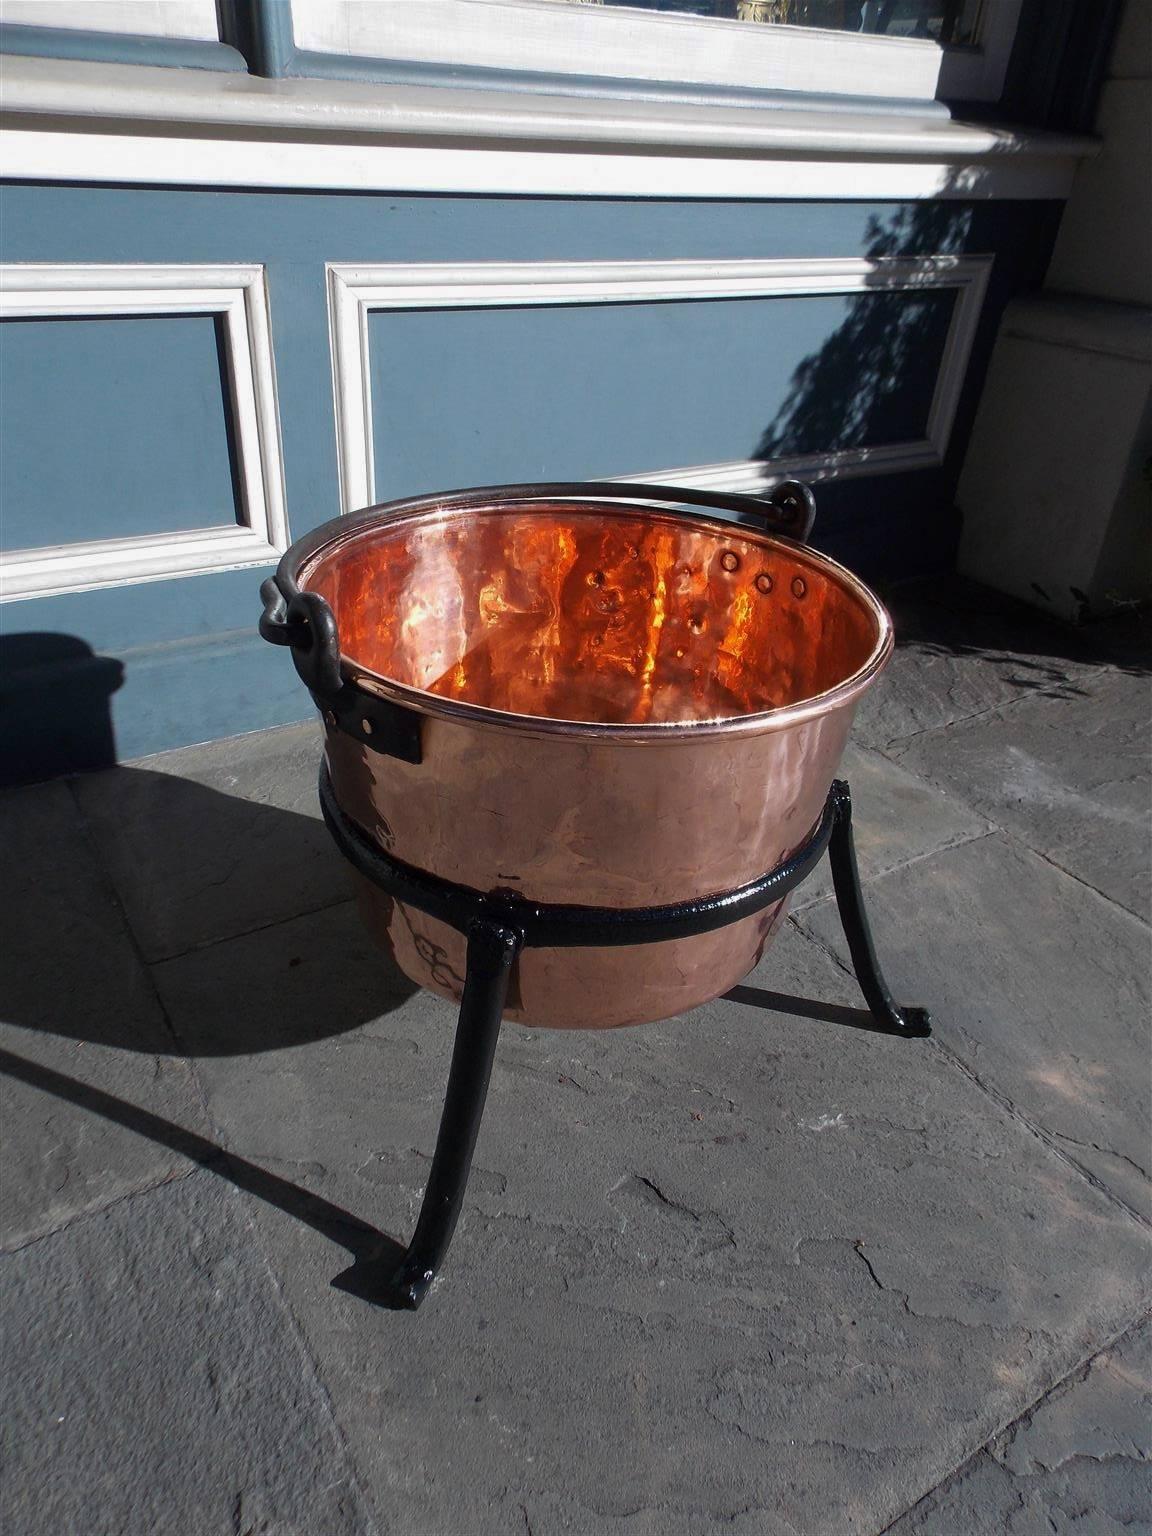 Hammered American Copper and Wrought Iron Plantation Cauldron on Stand, Circa 1780